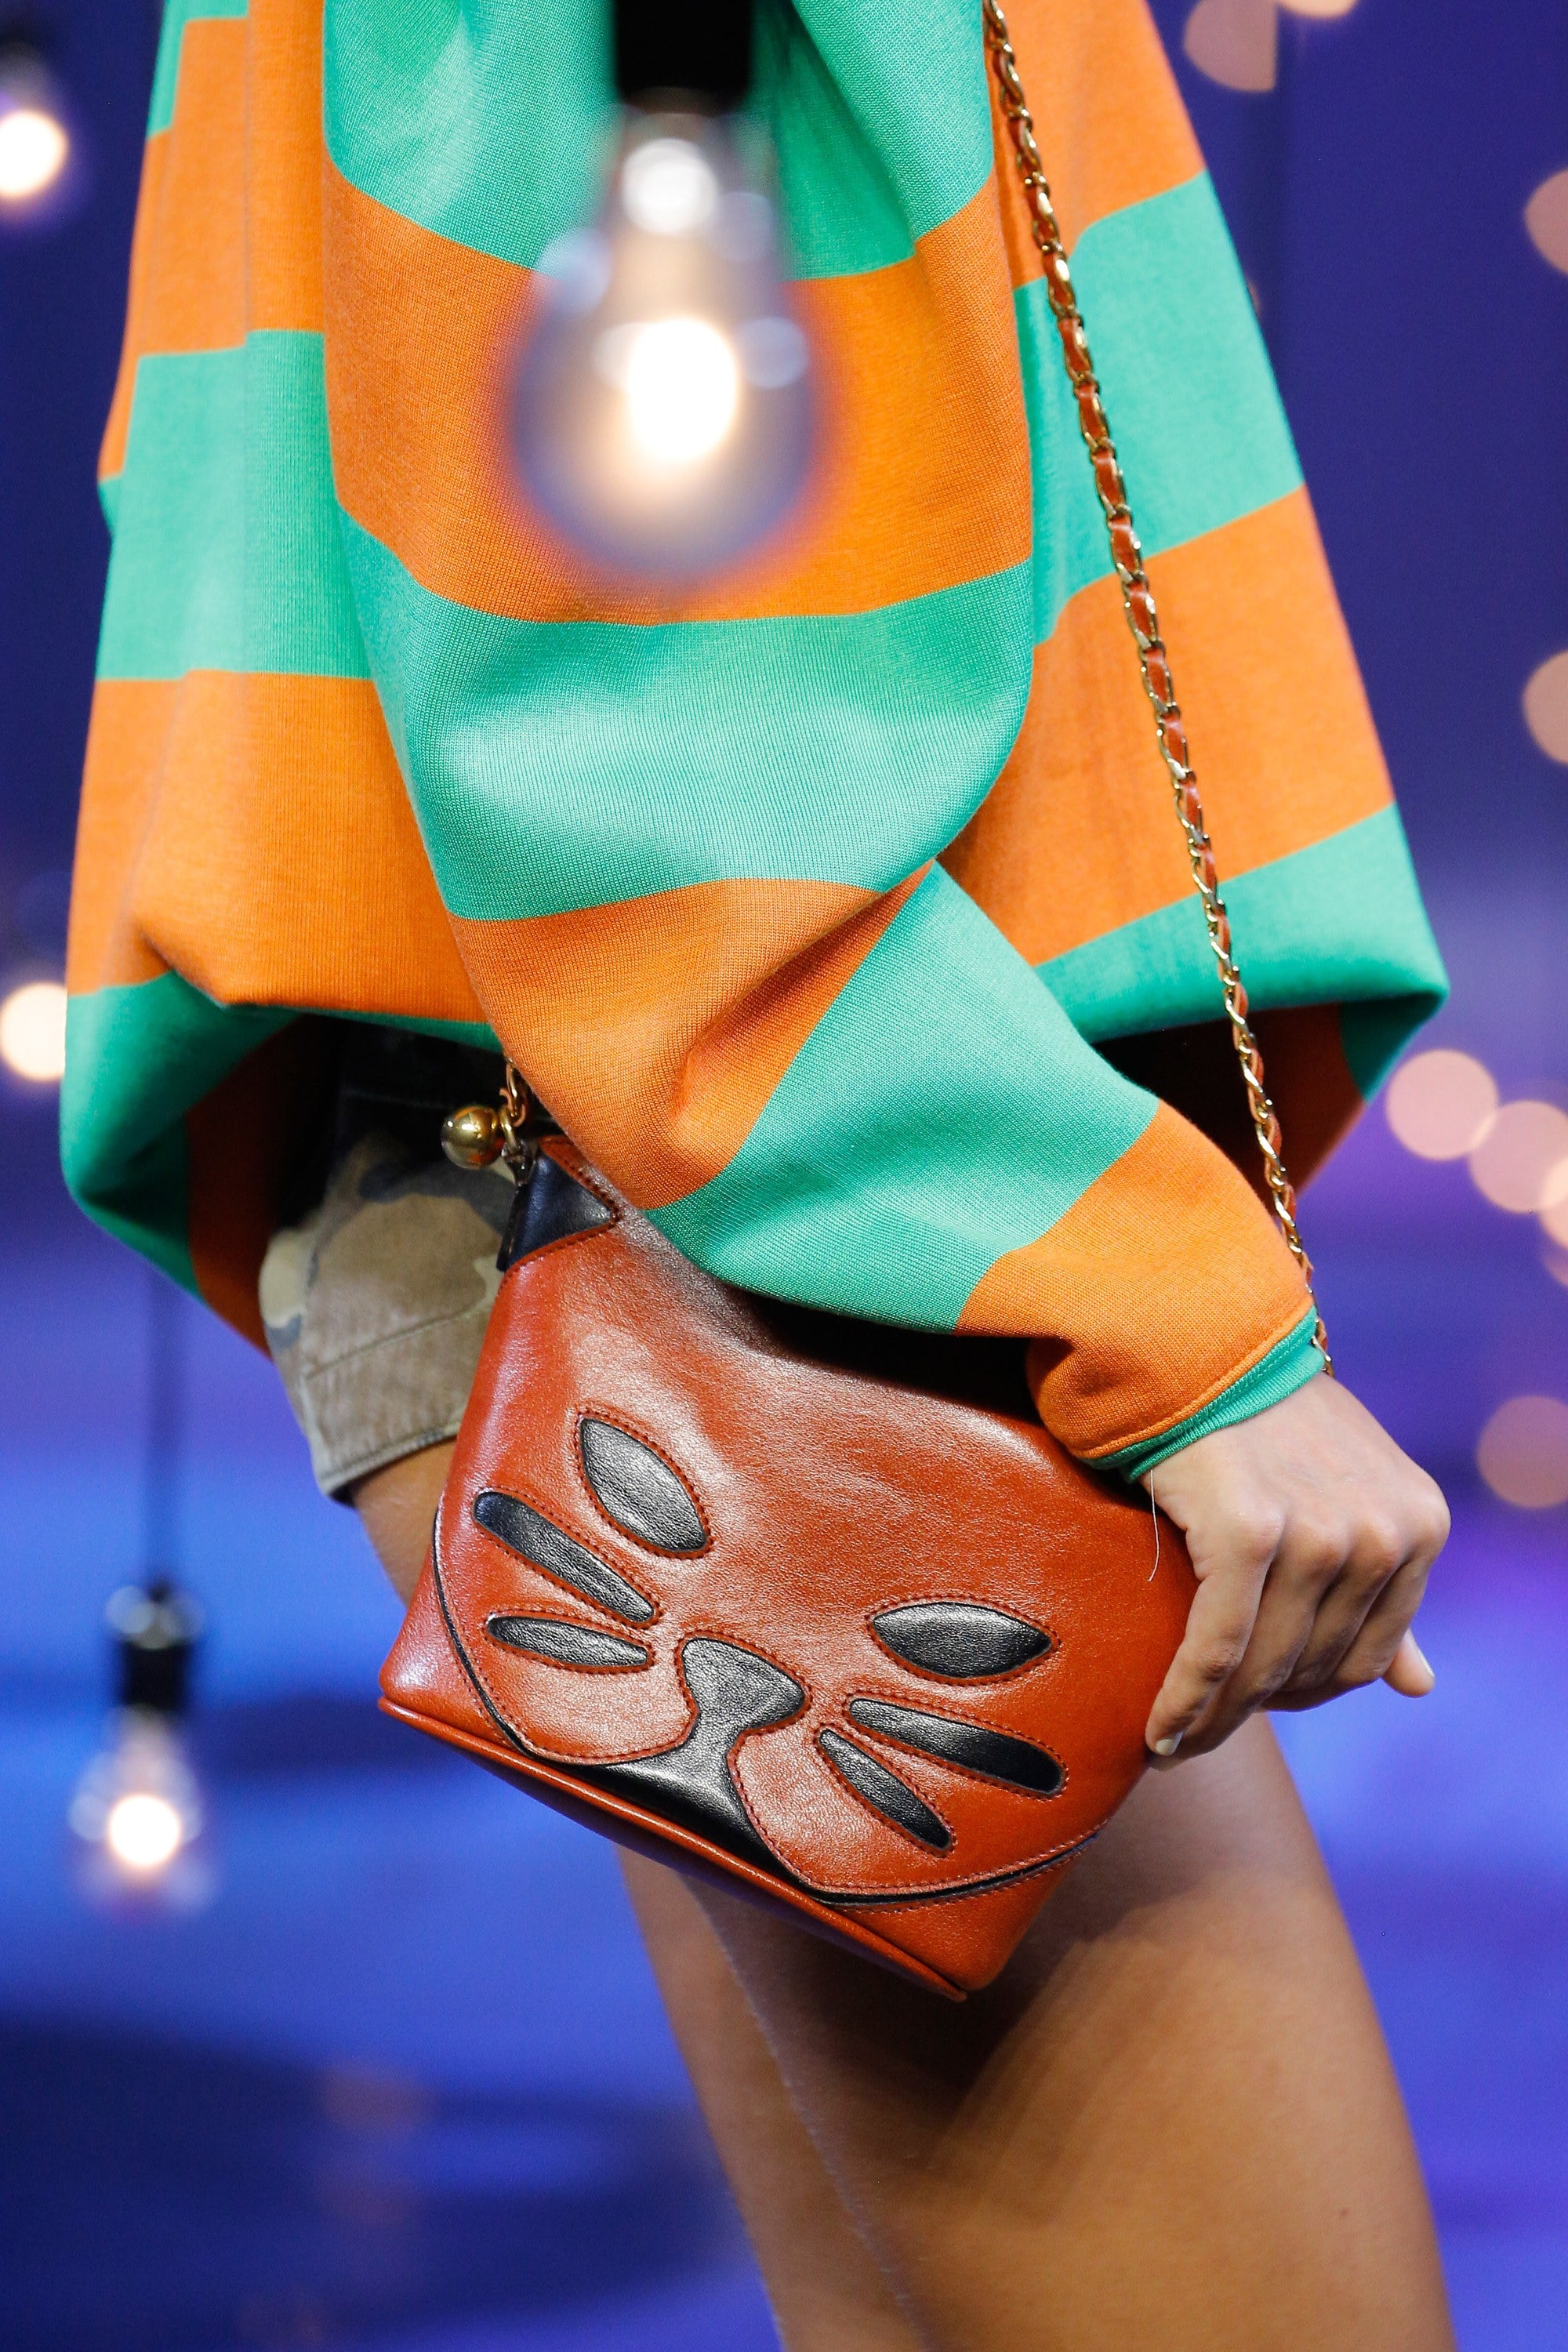 Marc Jacobs Spring/Summer 2017 Runway Bag Collection - Spotted Fashion